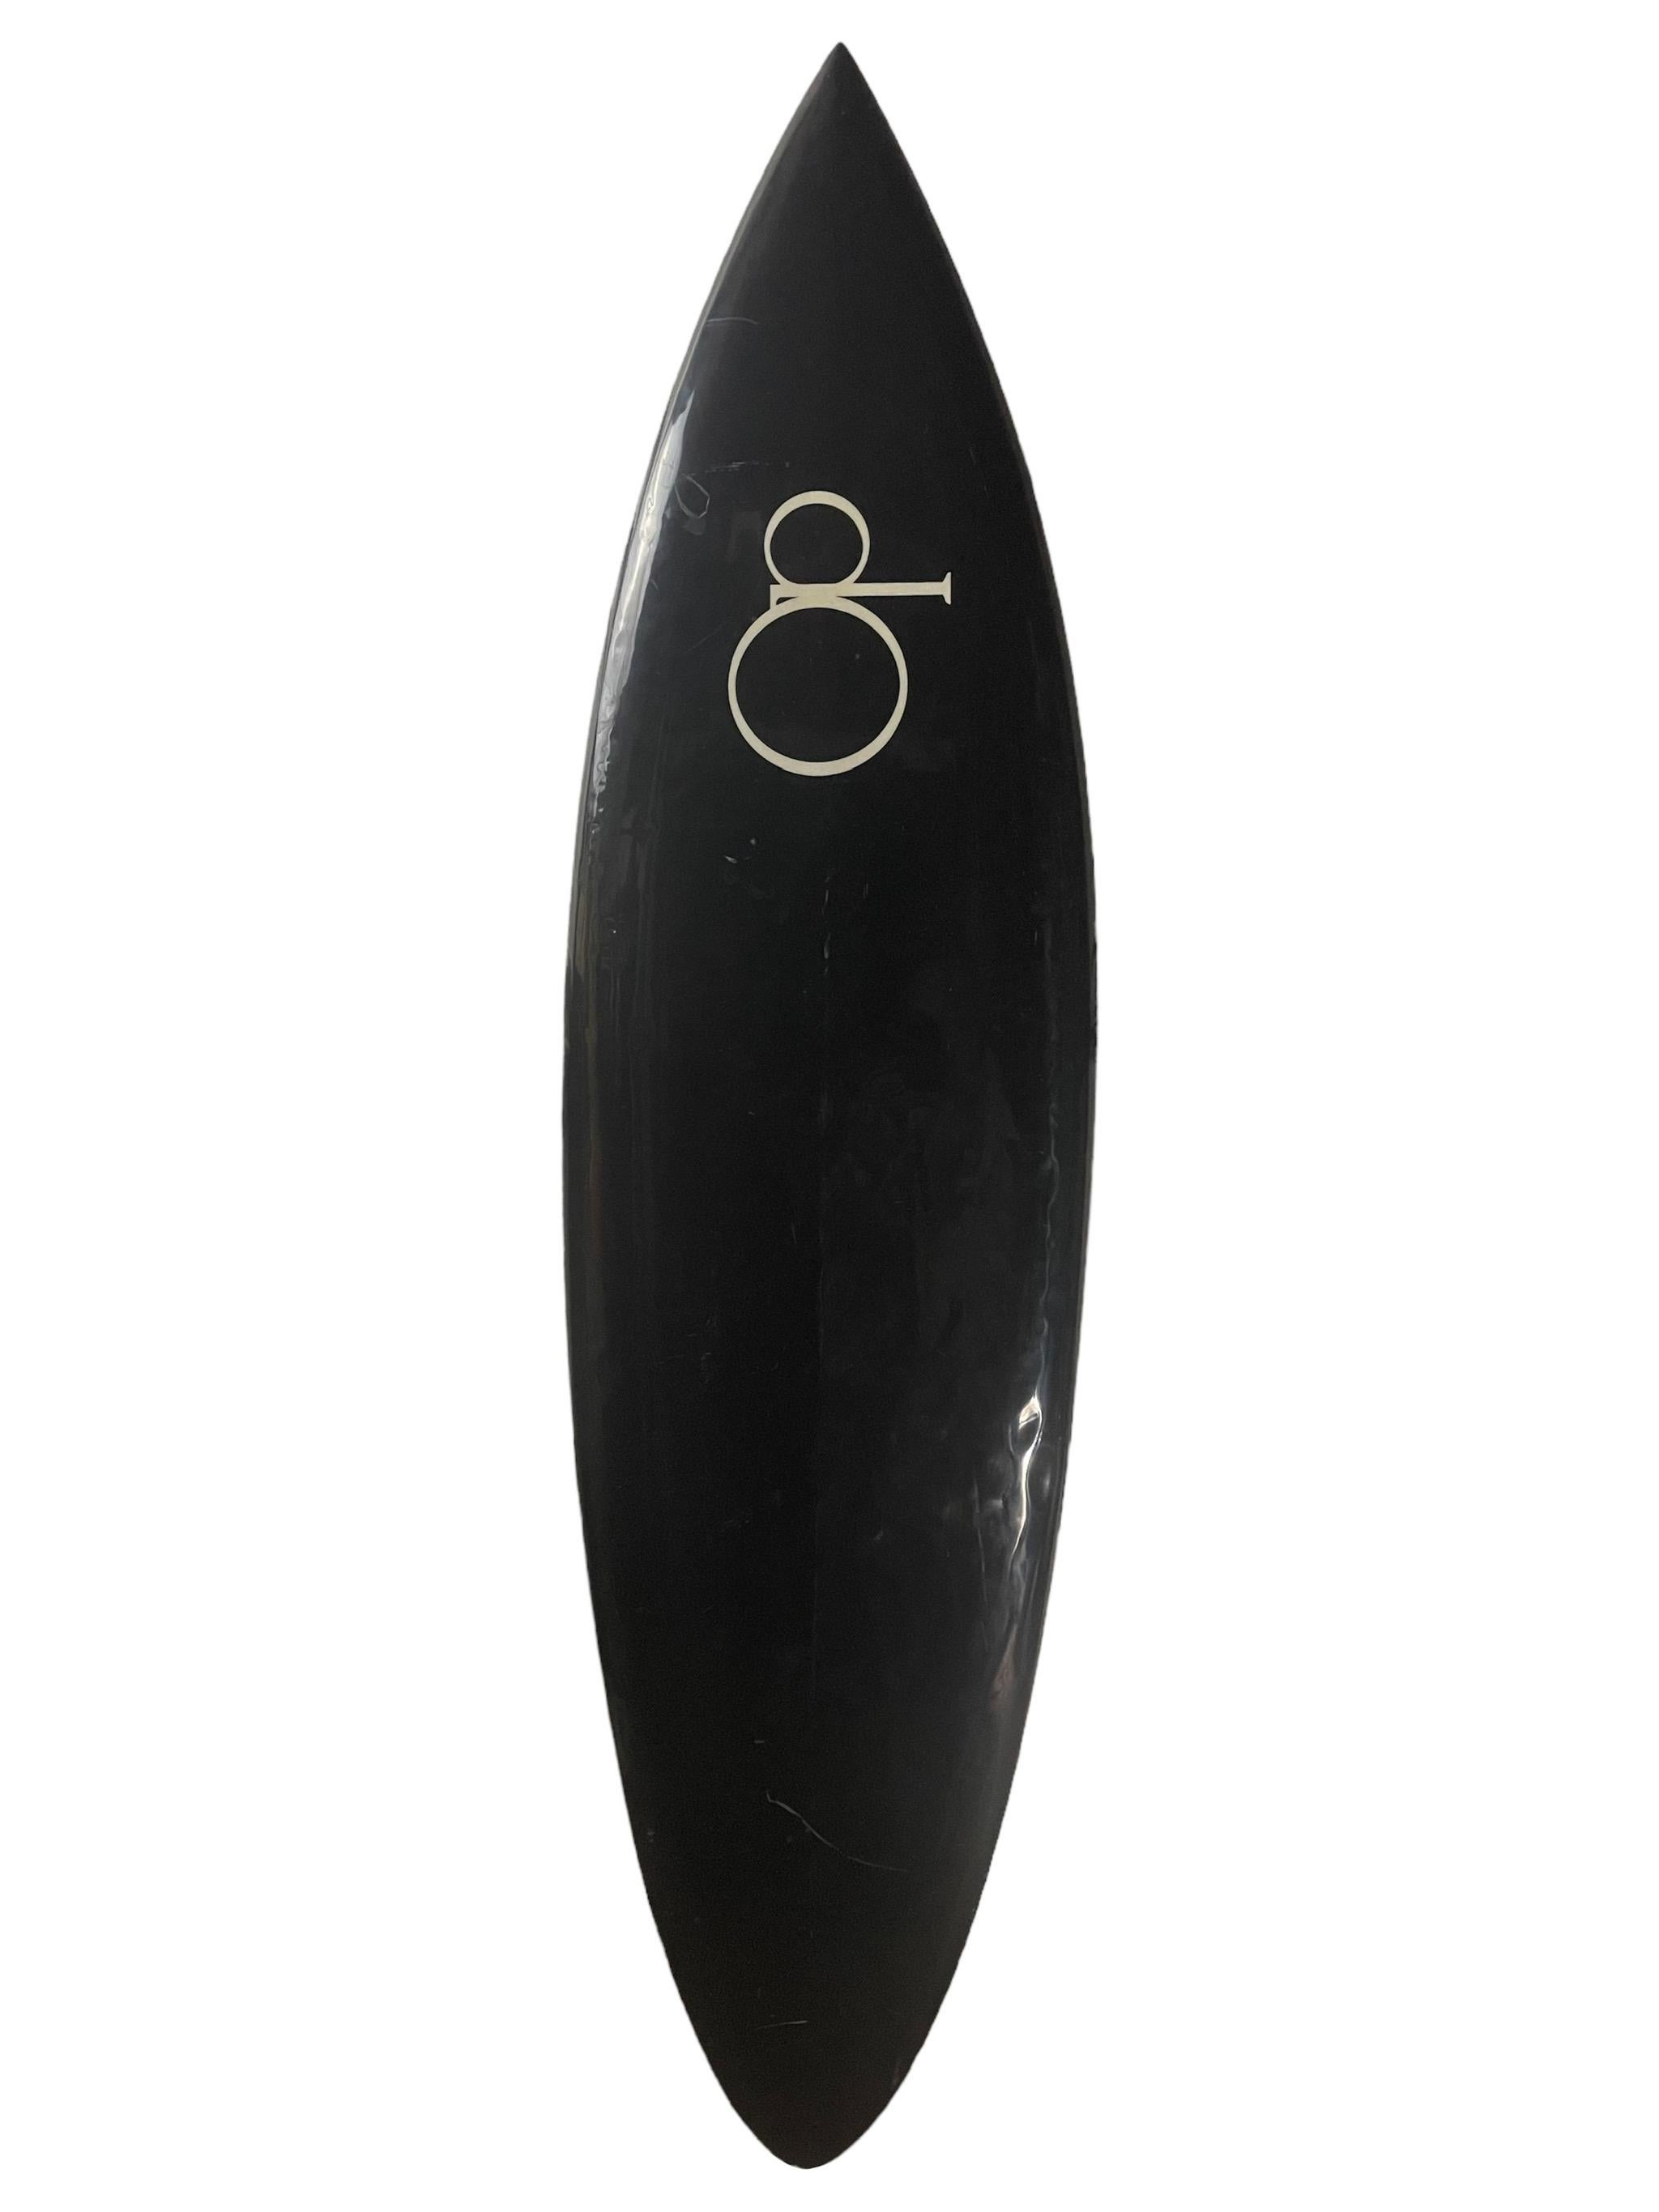 Vintage 1970s Ocean Pacific dolphin mural artwork surfboard. Features sleek black tint with breathtaking airbrushed mural depicting dolphins breaching the water. Round pintail shape design. A remarkable example of an original 1970s vintage surfboard